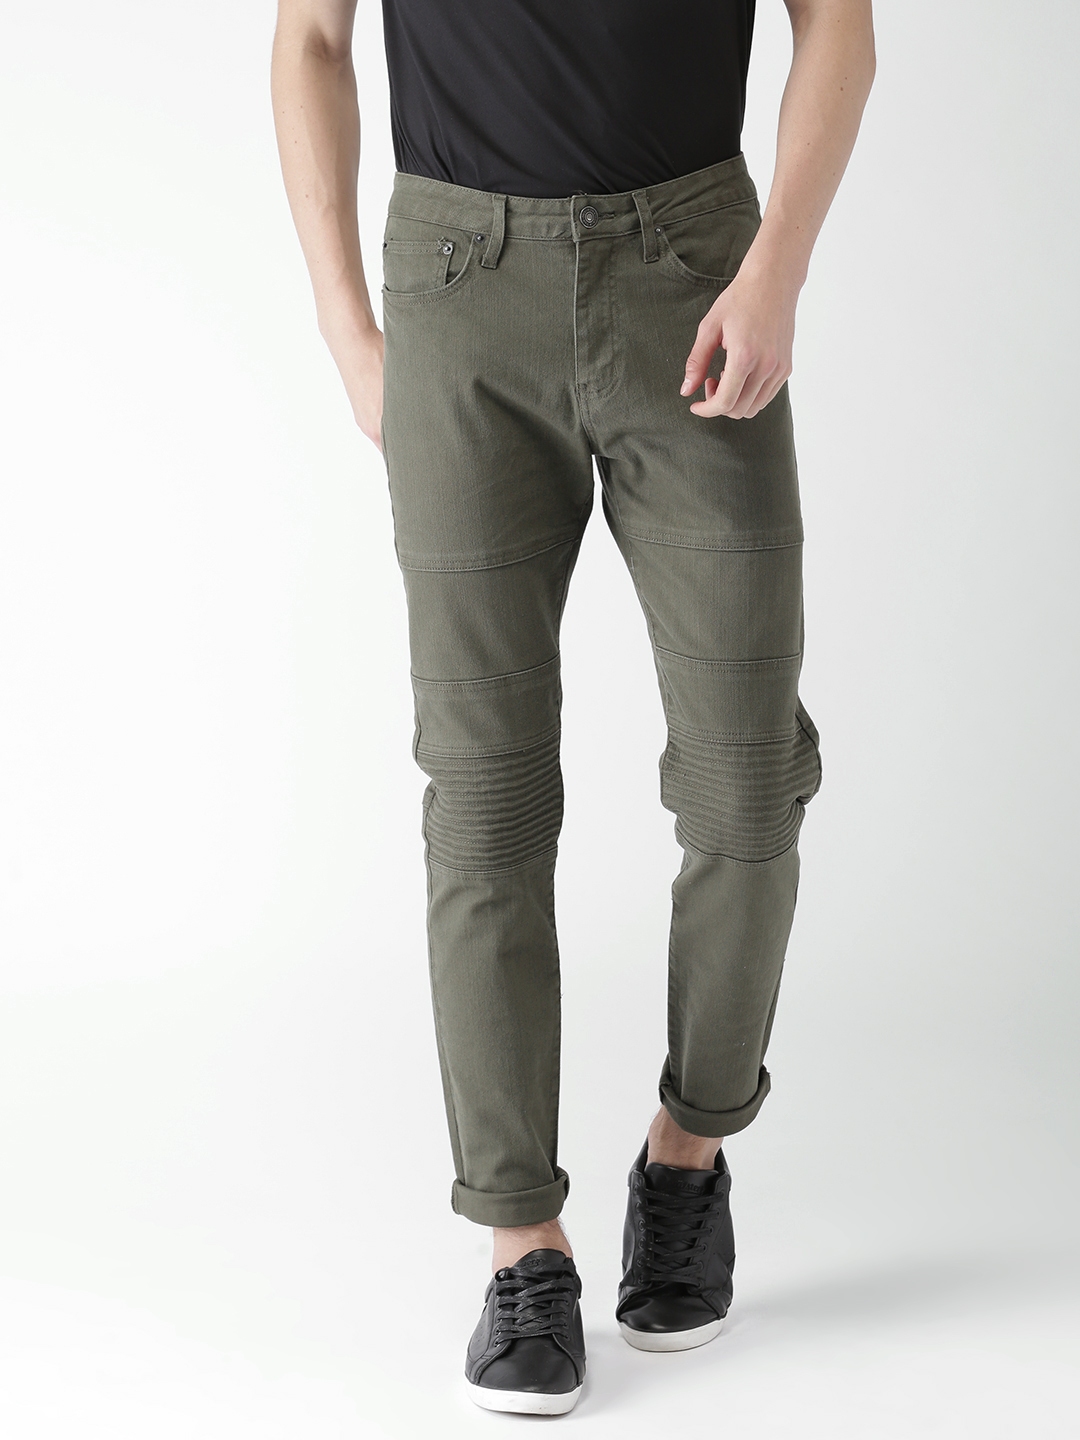 Forever 21 Trousers and Pants  Buy Forever 21 Olive Solid Pants Online   Nykaa Fashion